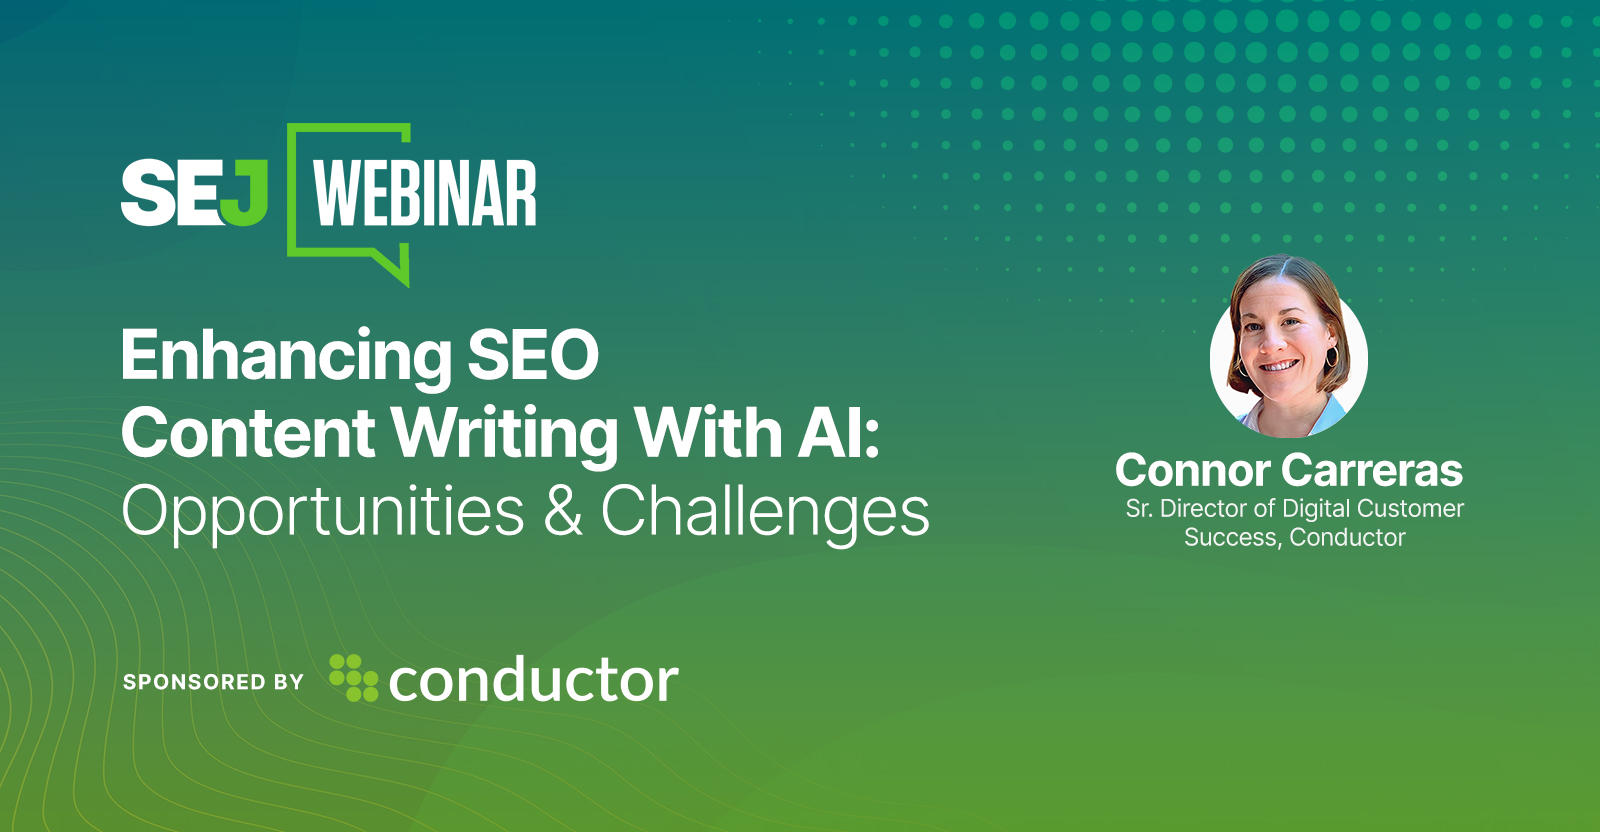 How to use AI to improve your SEO content writing [Webinar]